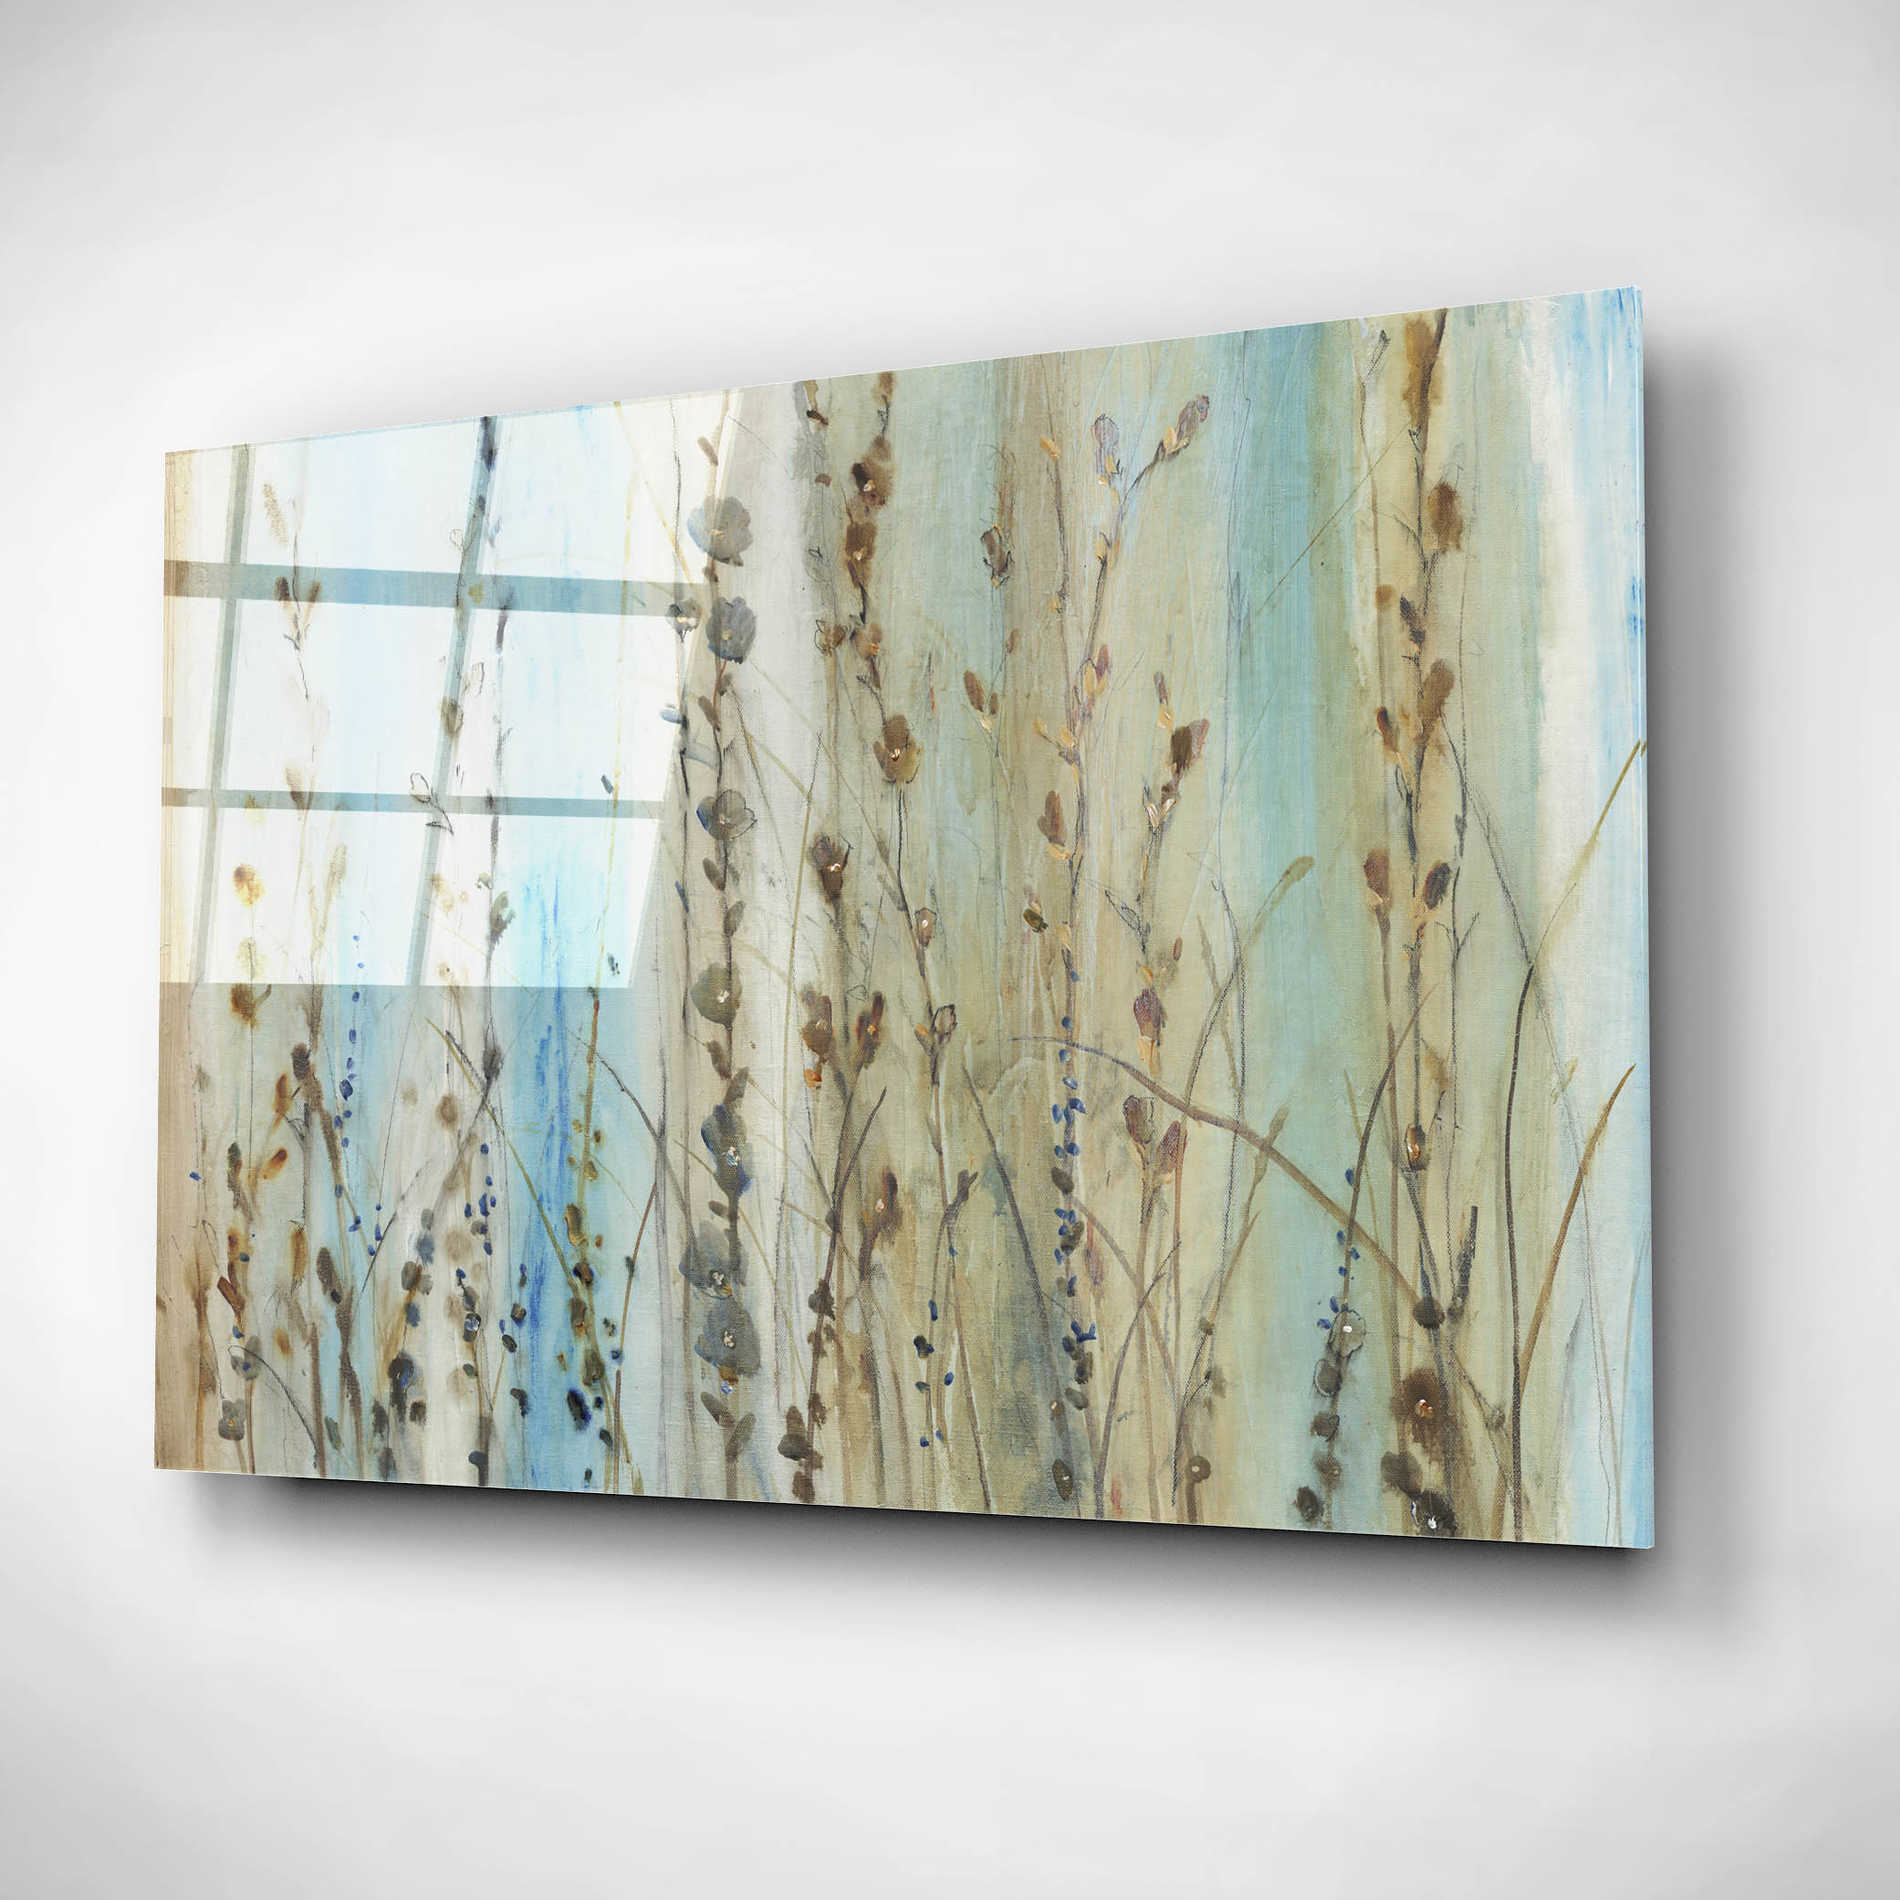 Epic Art 'Ombre Floral I' by Tim O'Toole, Acrylic Glass Wall Art,24x16